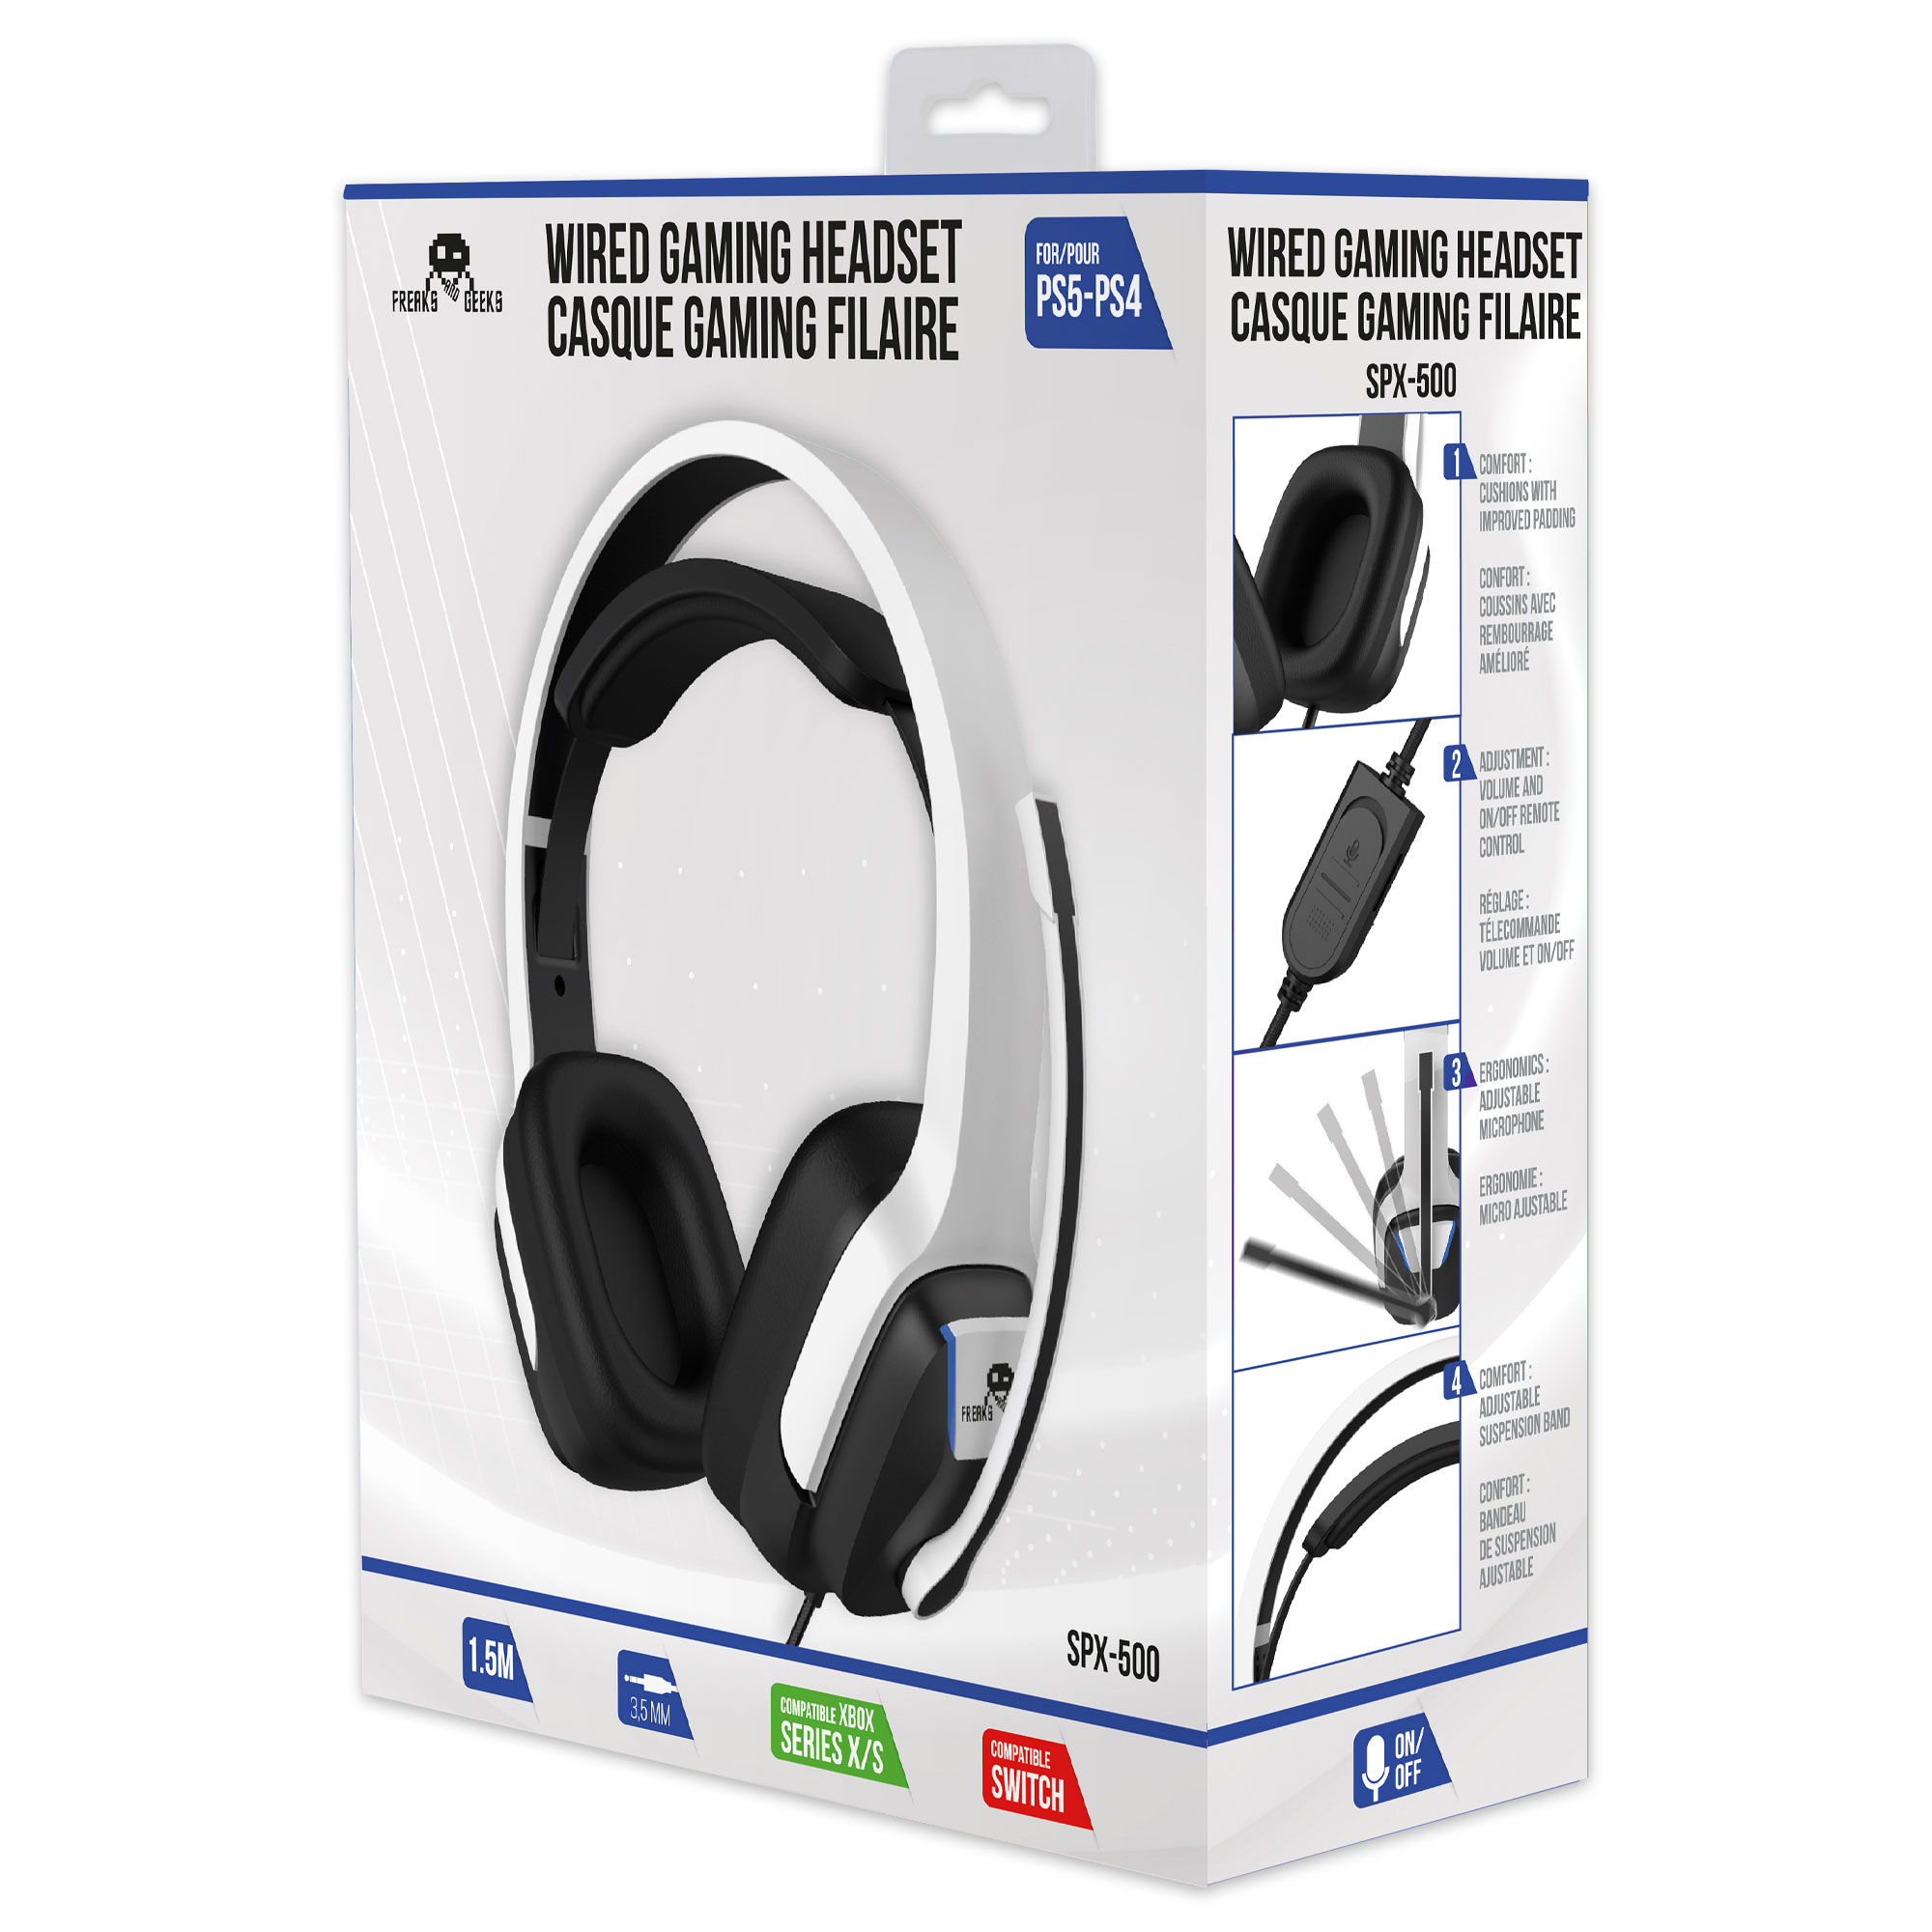 Casque gaming filaire XSX-500 pour Series X/S (compatible PS5, Switch) -  Freaks and Geeks